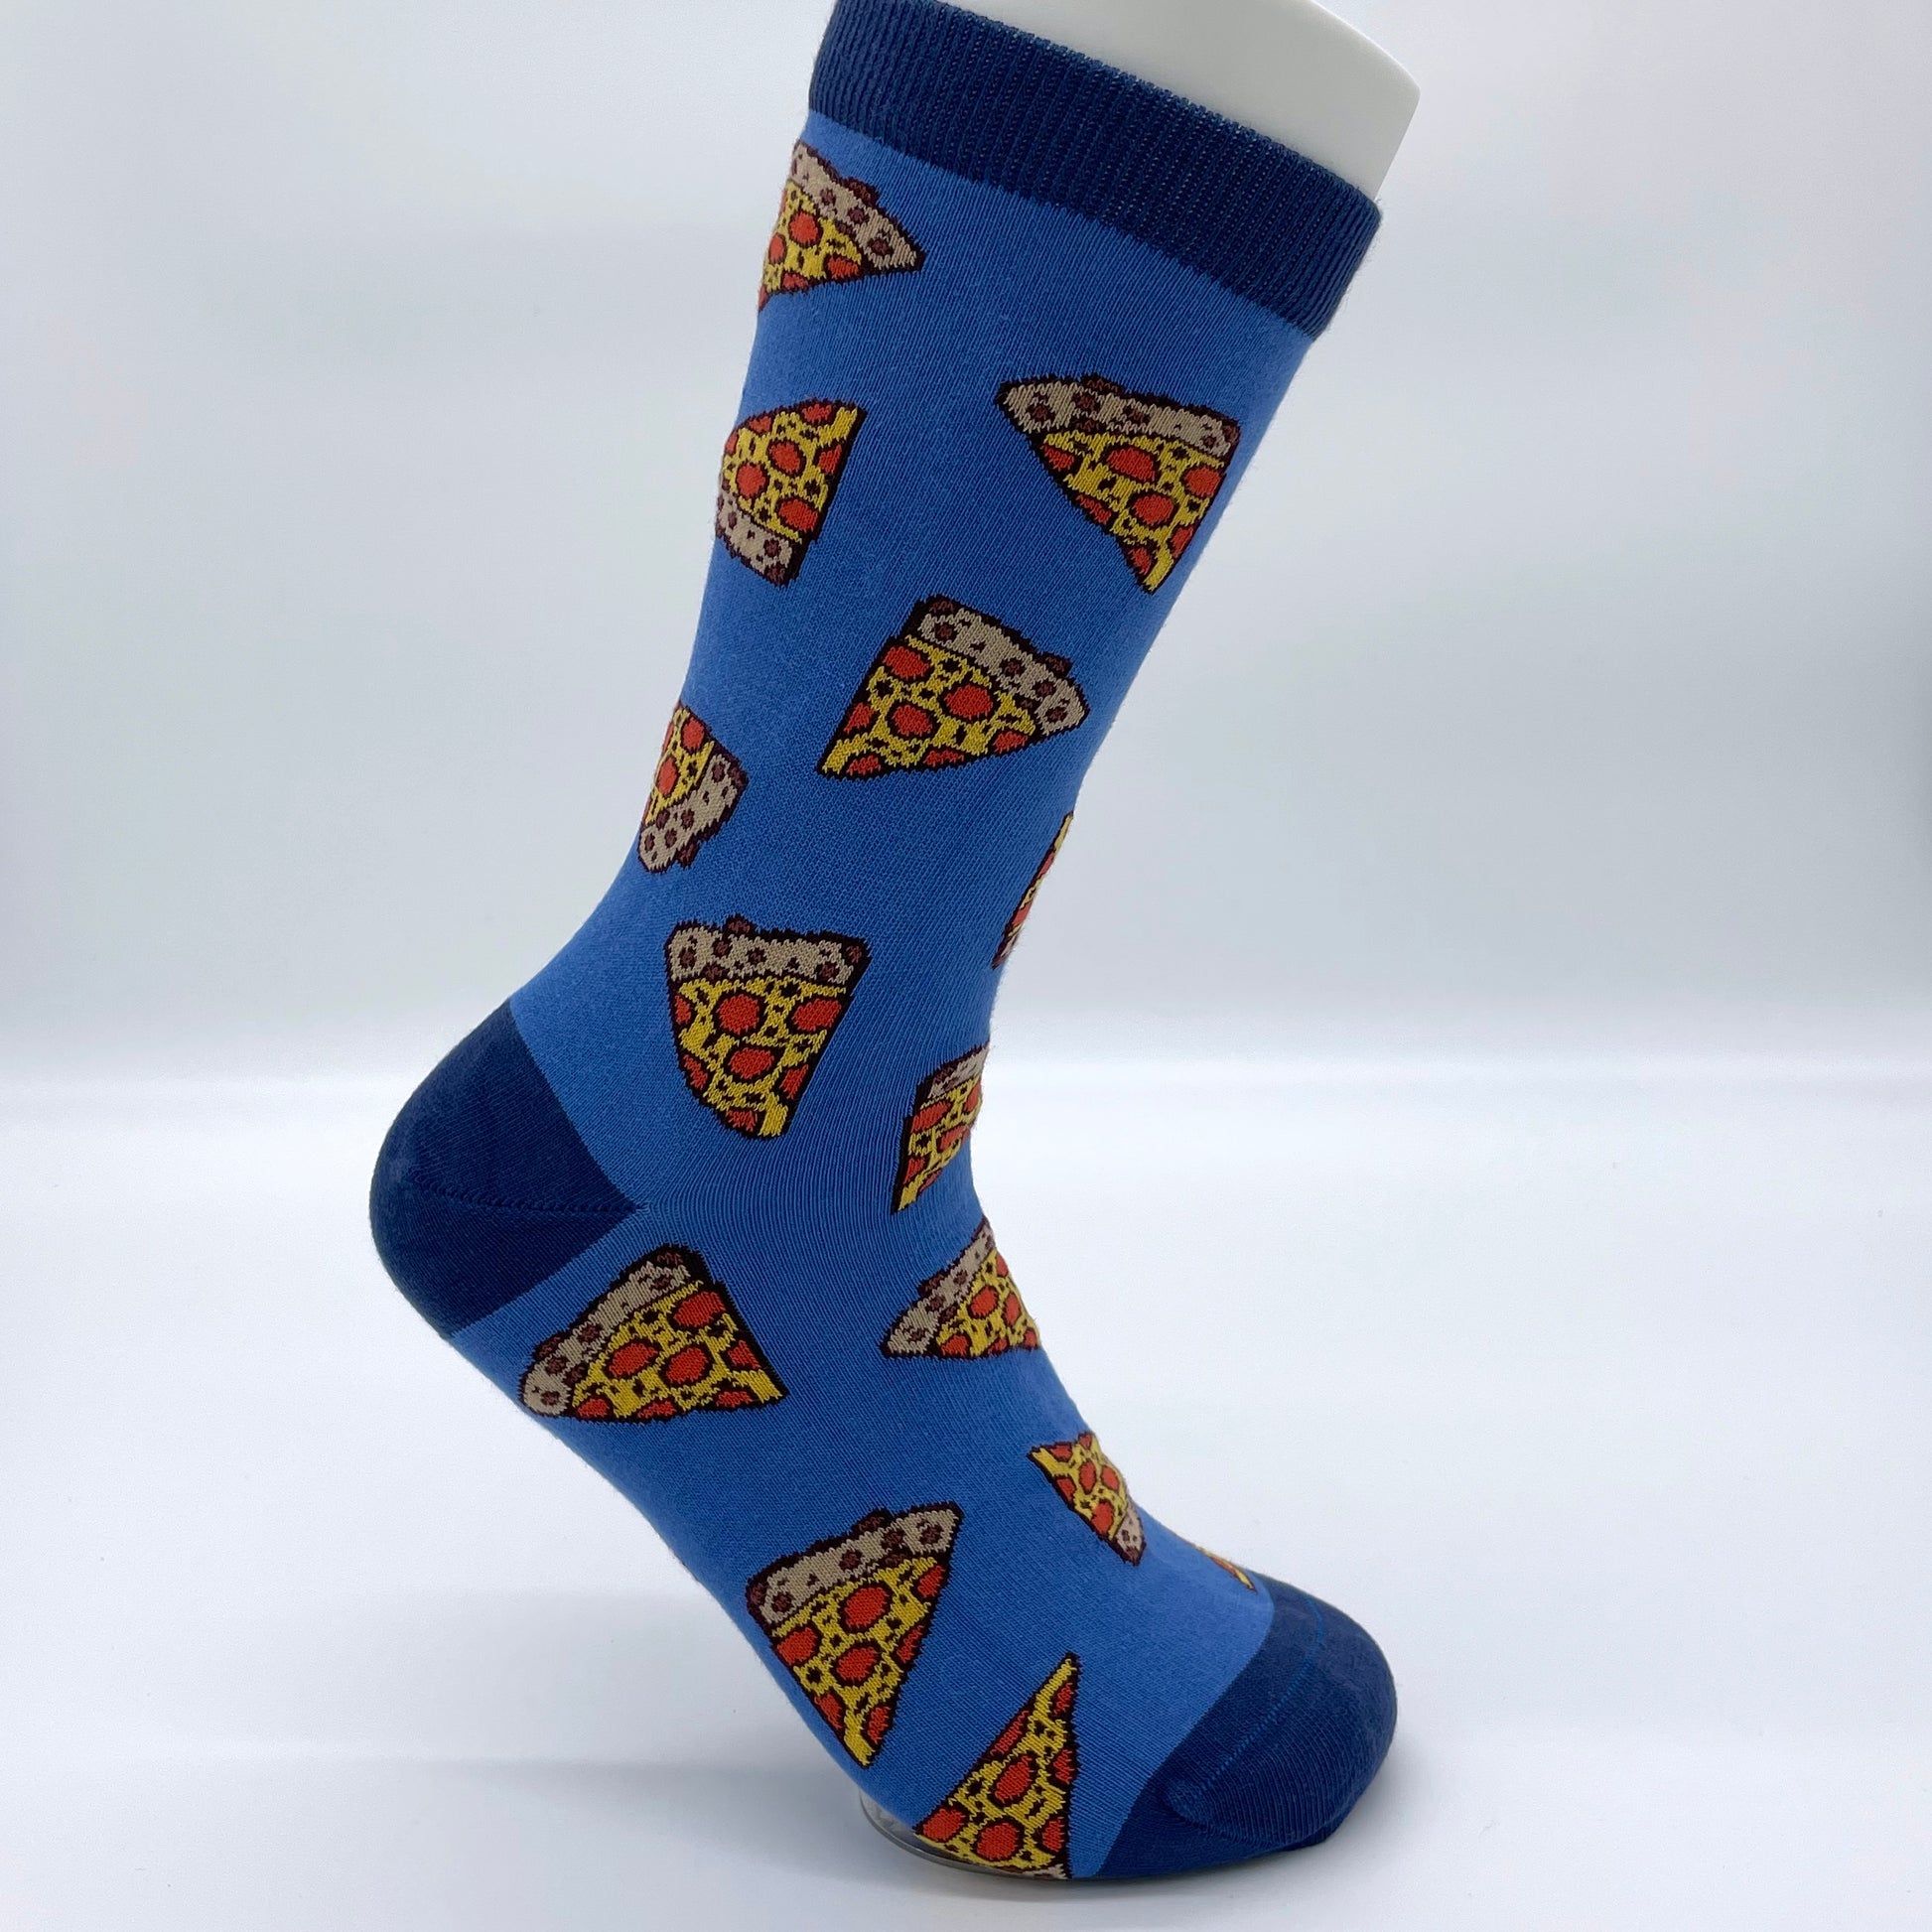 A white sock mannequin sports a blue sock patterned with slices of pepperoni pizza.